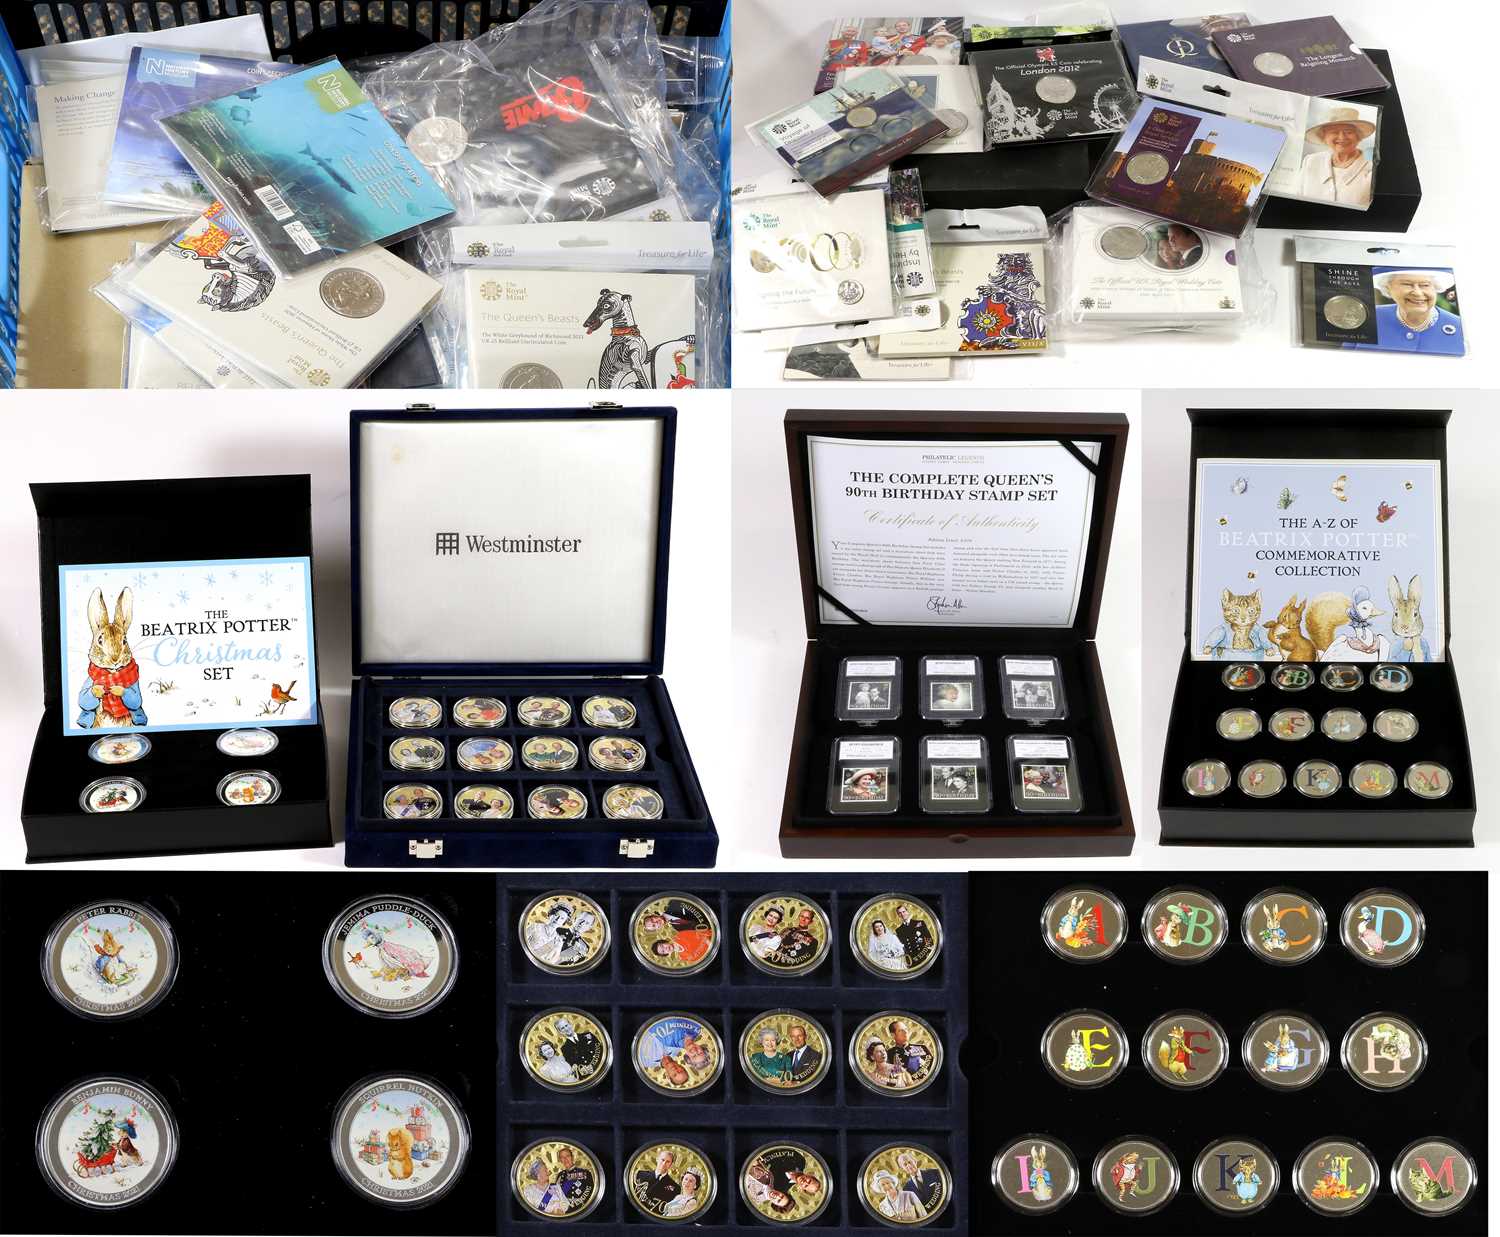 Commemorative Coins and Medallic Sets, 2 x crates, highlights include: 'Platinum Wedding